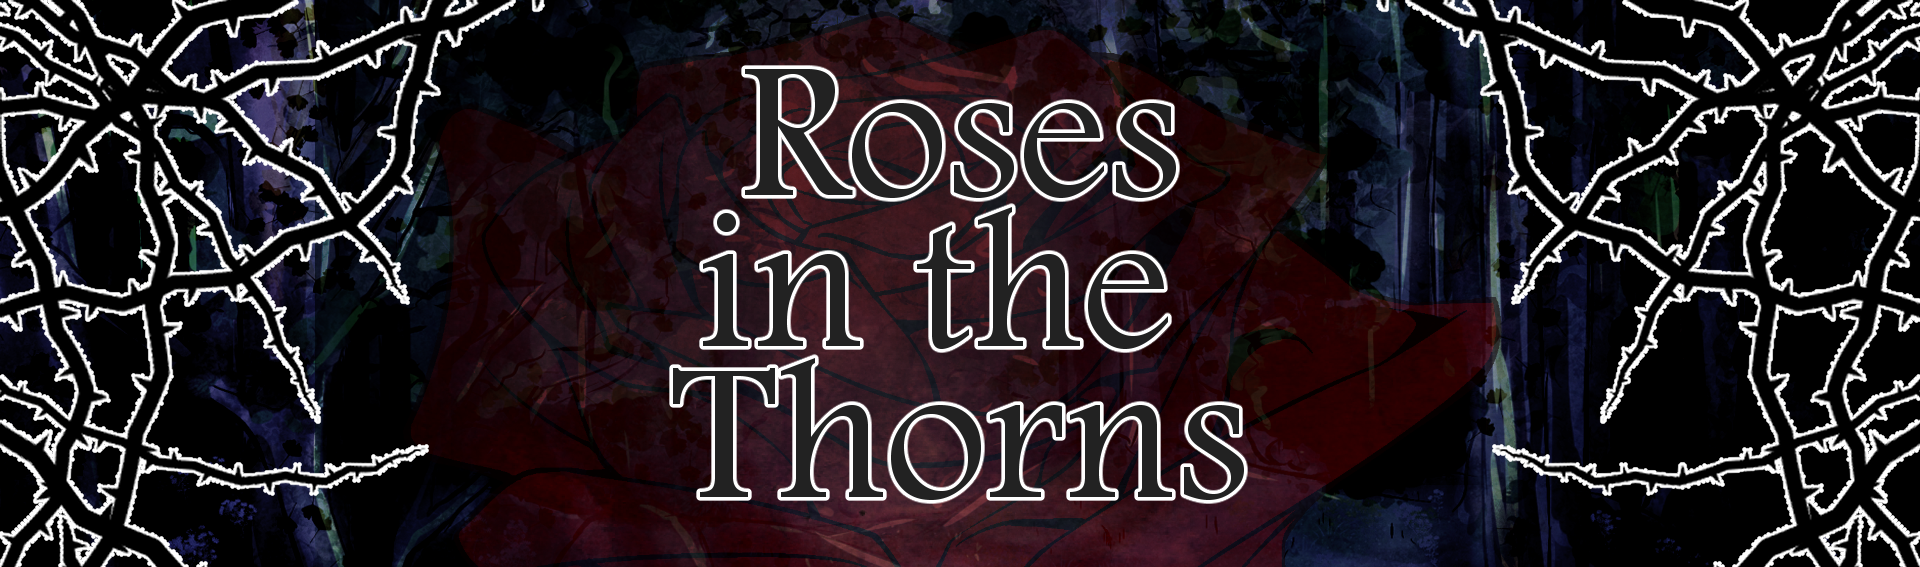 Roses in the Thorns